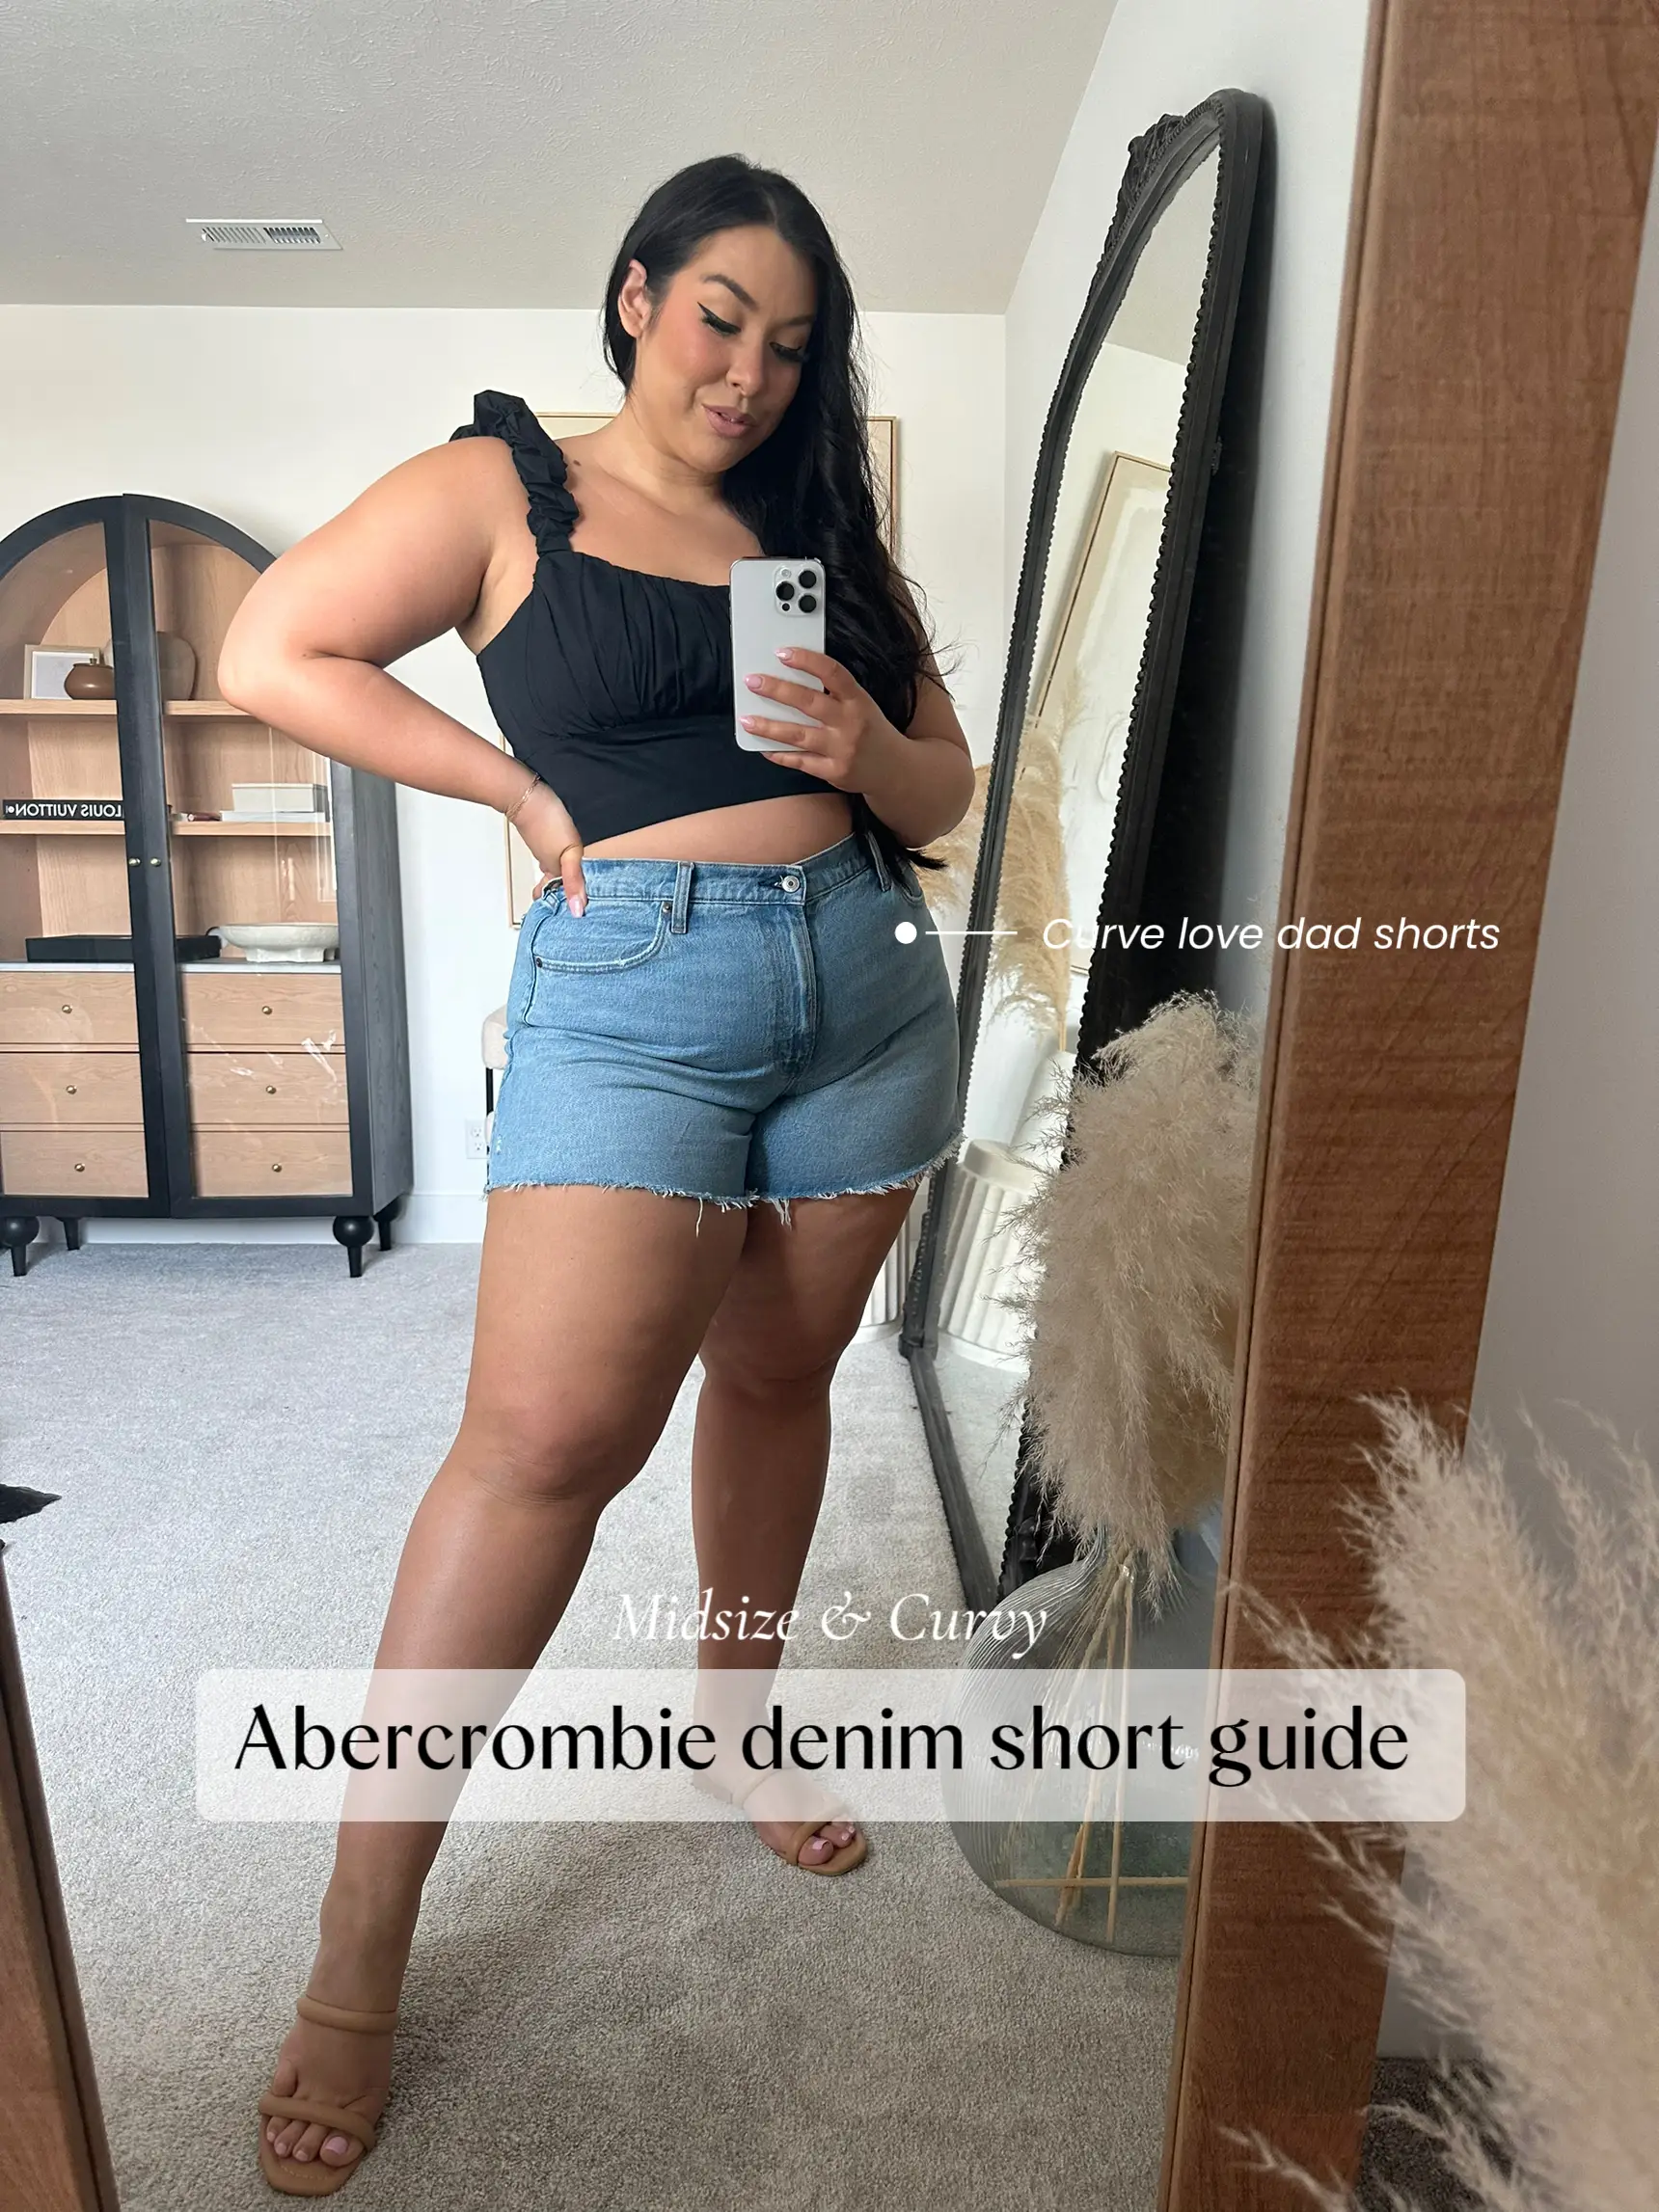 Abercrombie & Fitch Outfits Are My Favorite, As A Mid-Size Woman